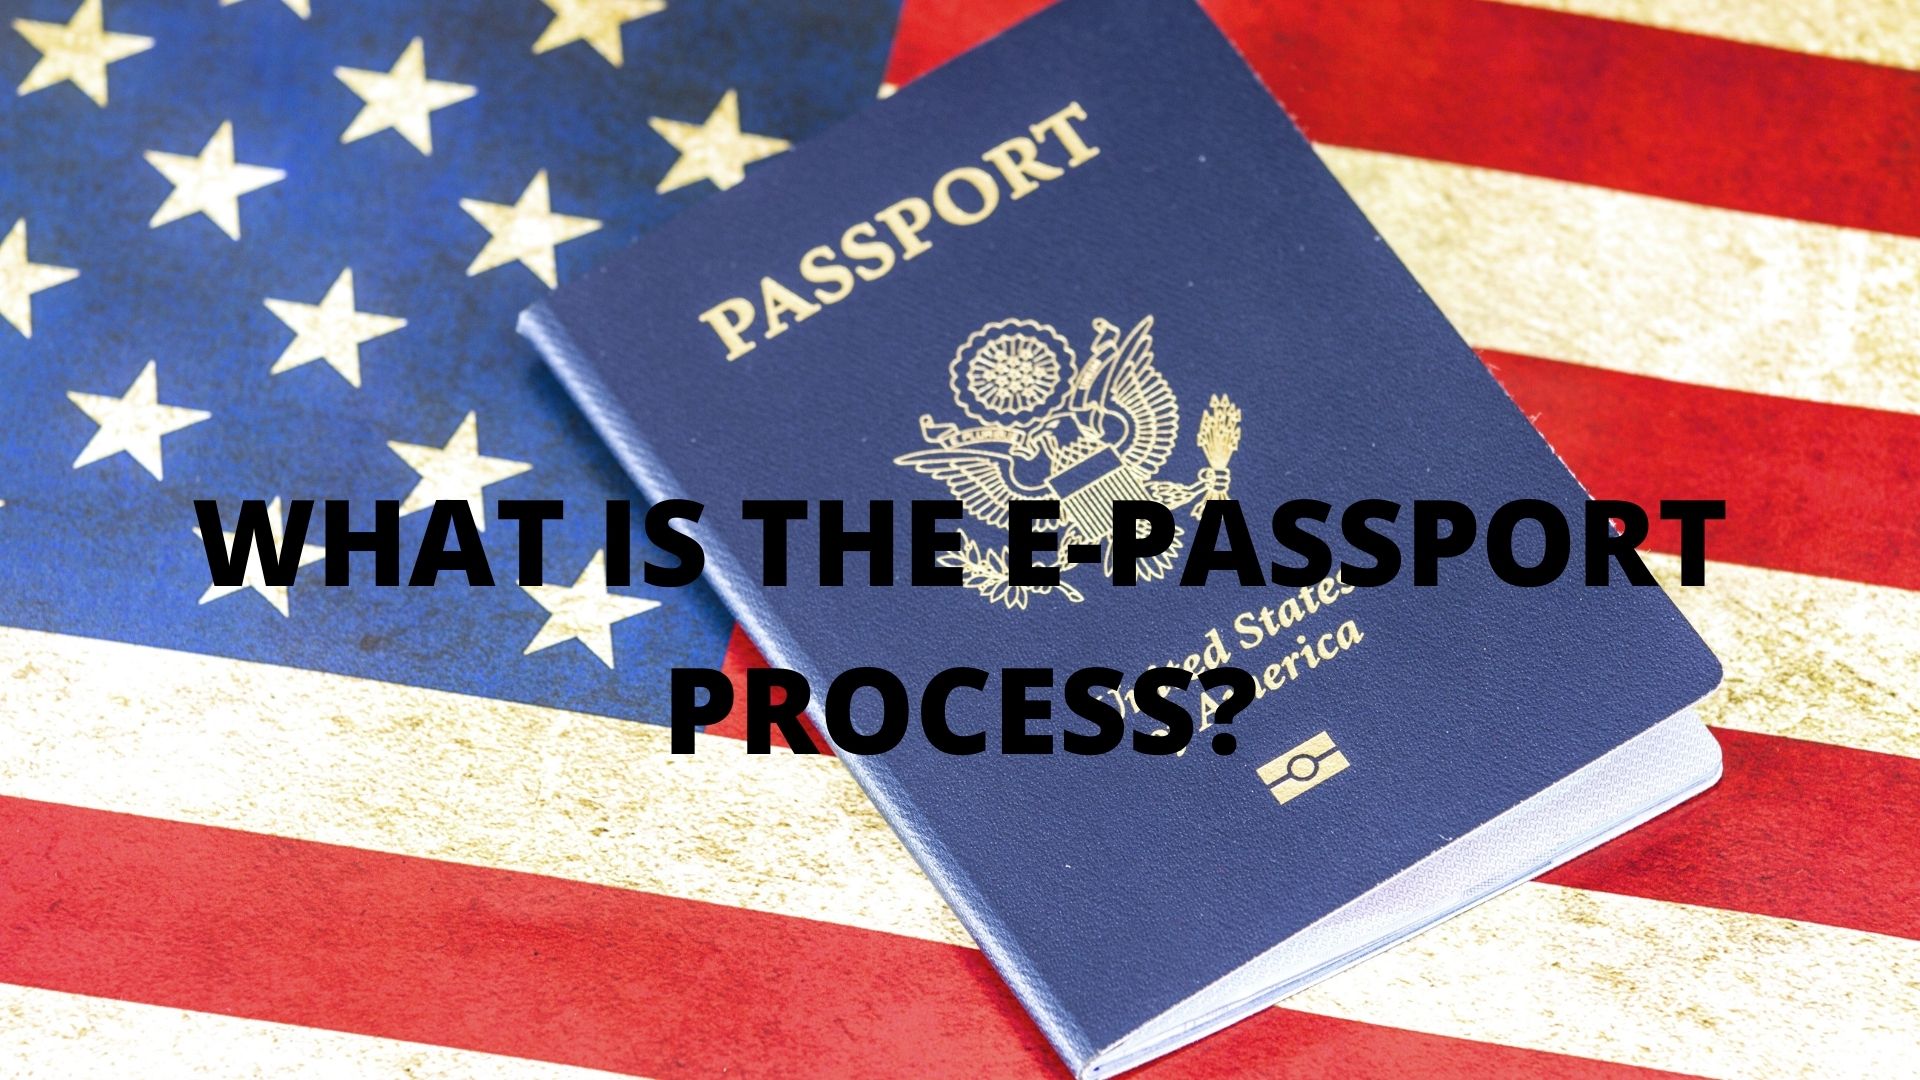 WHAT IS THE E-PASSPORT PROCESS?